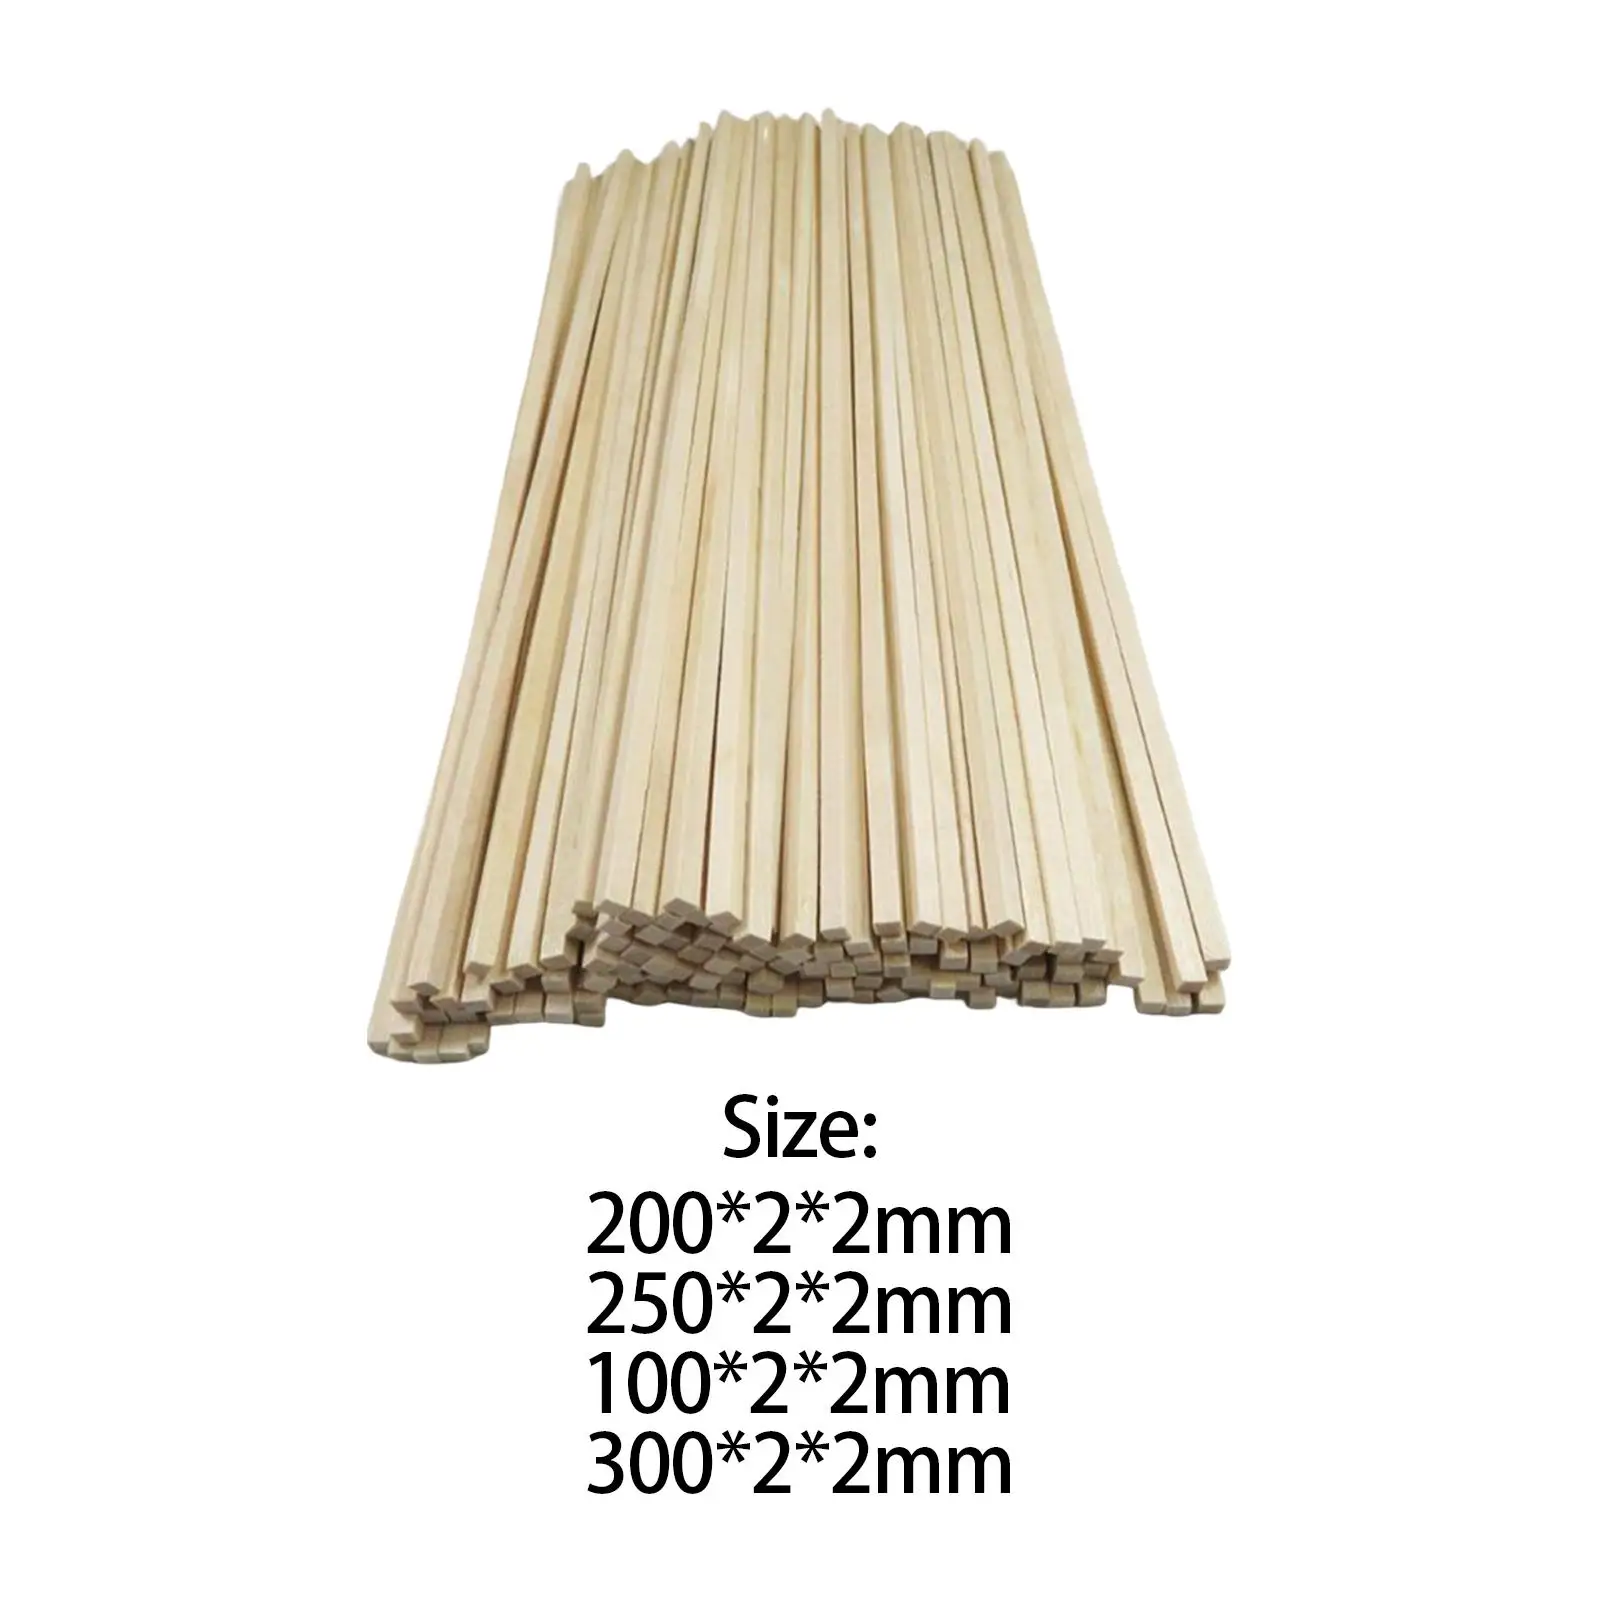 100x Unfinished Wood Woodcrafts Arts Sticks wood Dowel Sticks for Crafts DIY Projects Supplies Educational Home Decoration